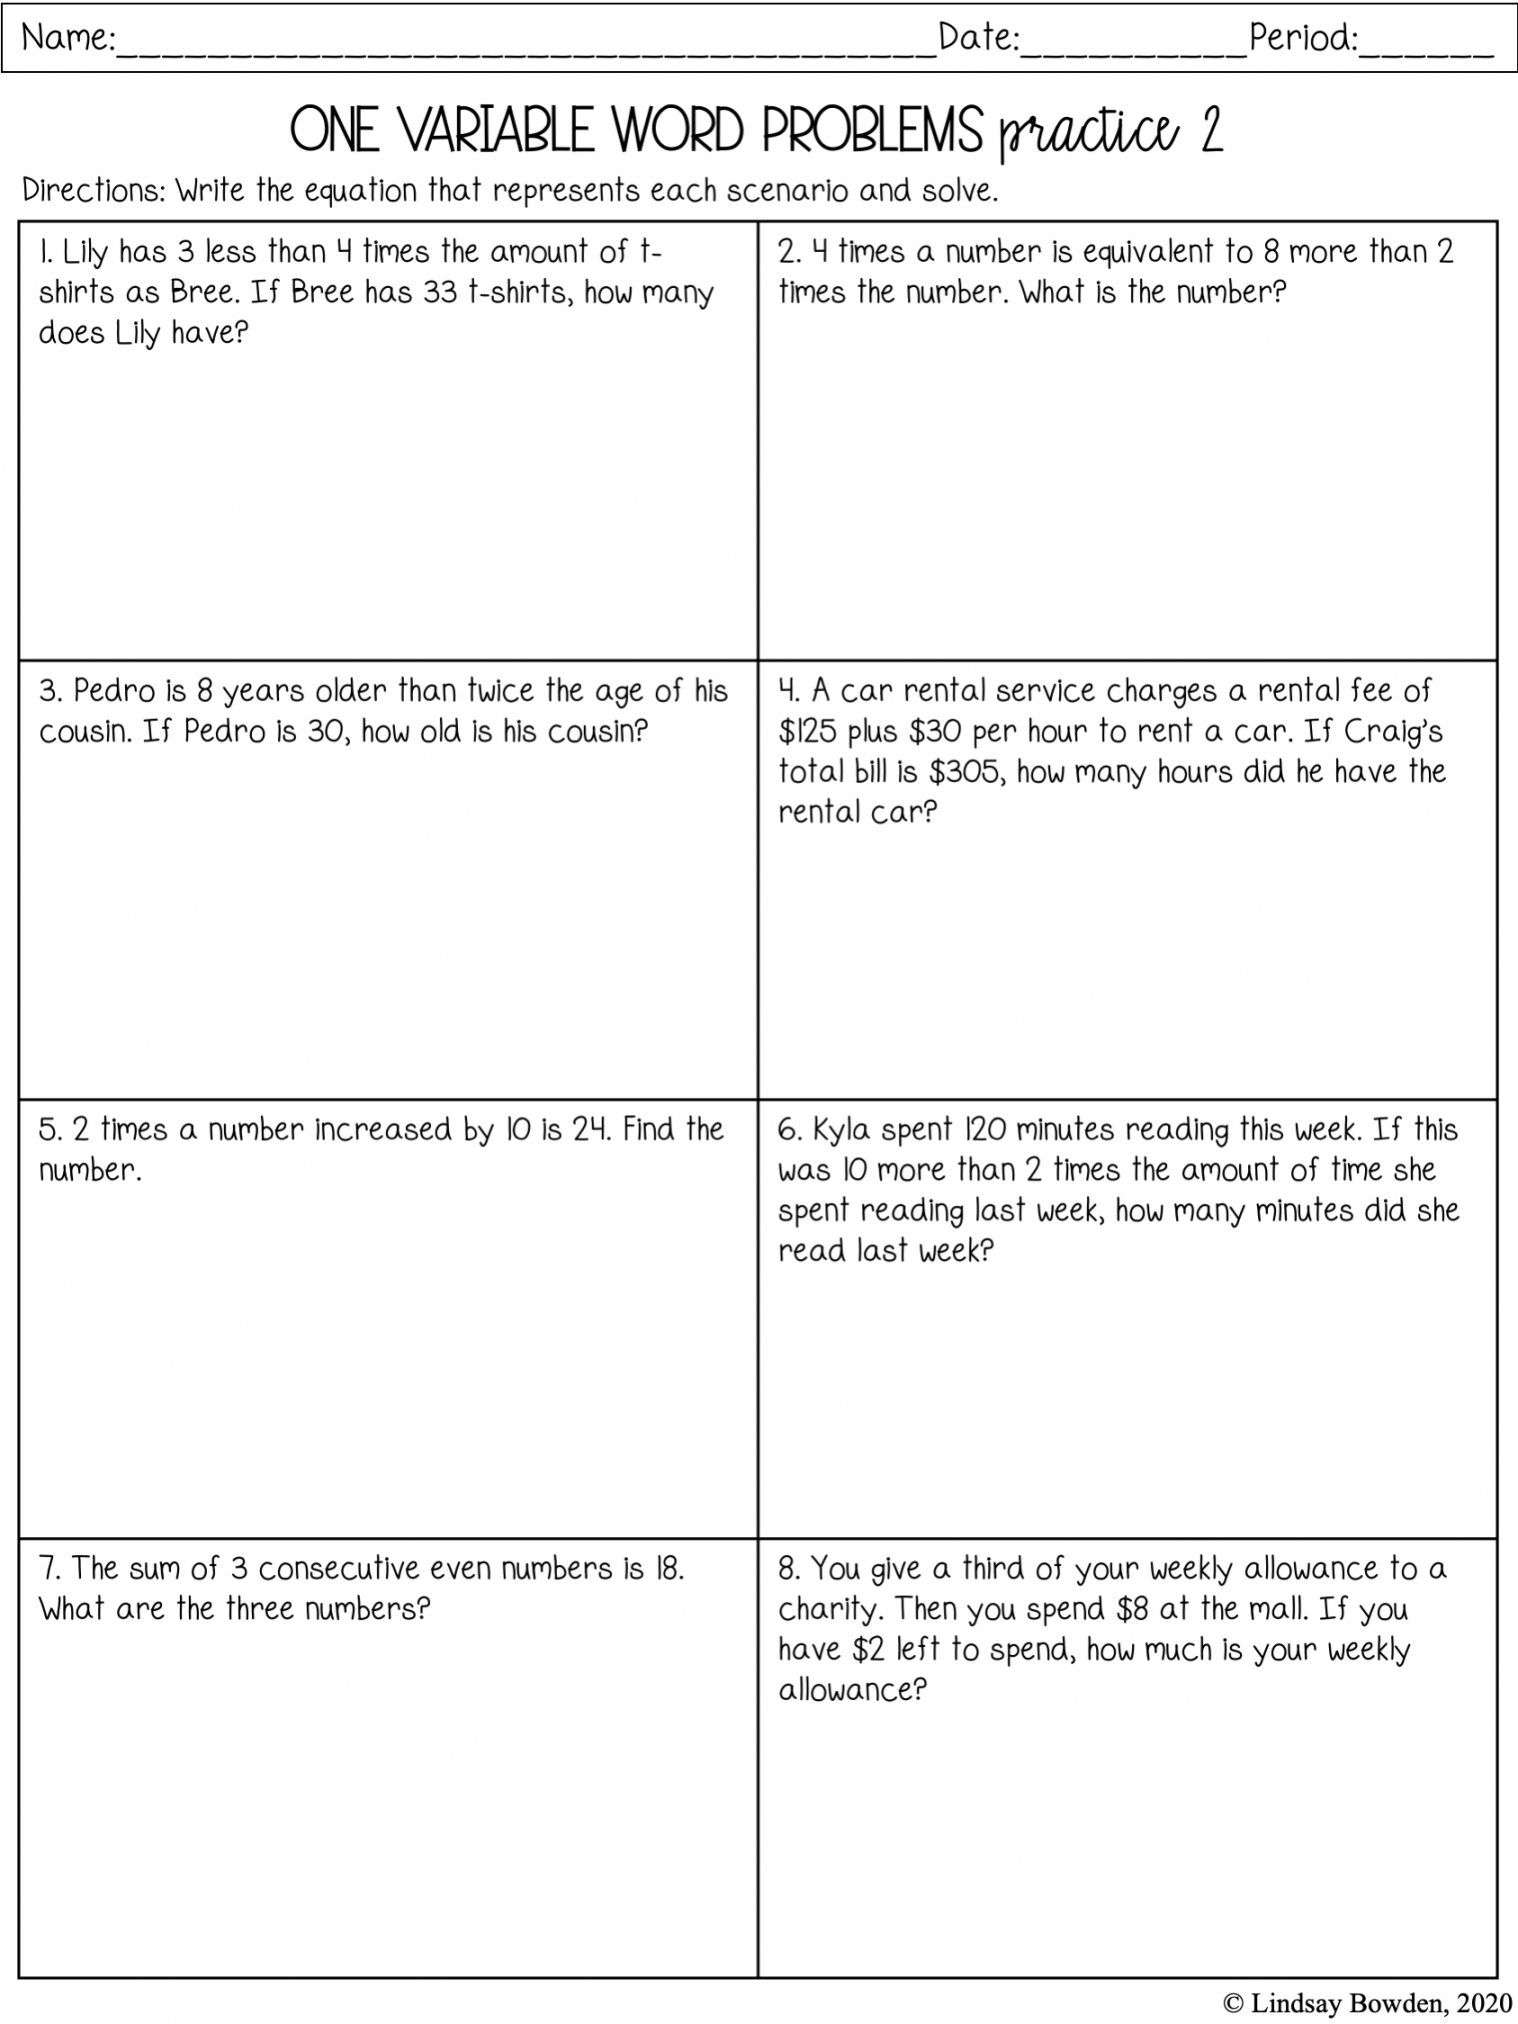 One Variable Word Problems Notes and Worksheets - Lindsay Bowden